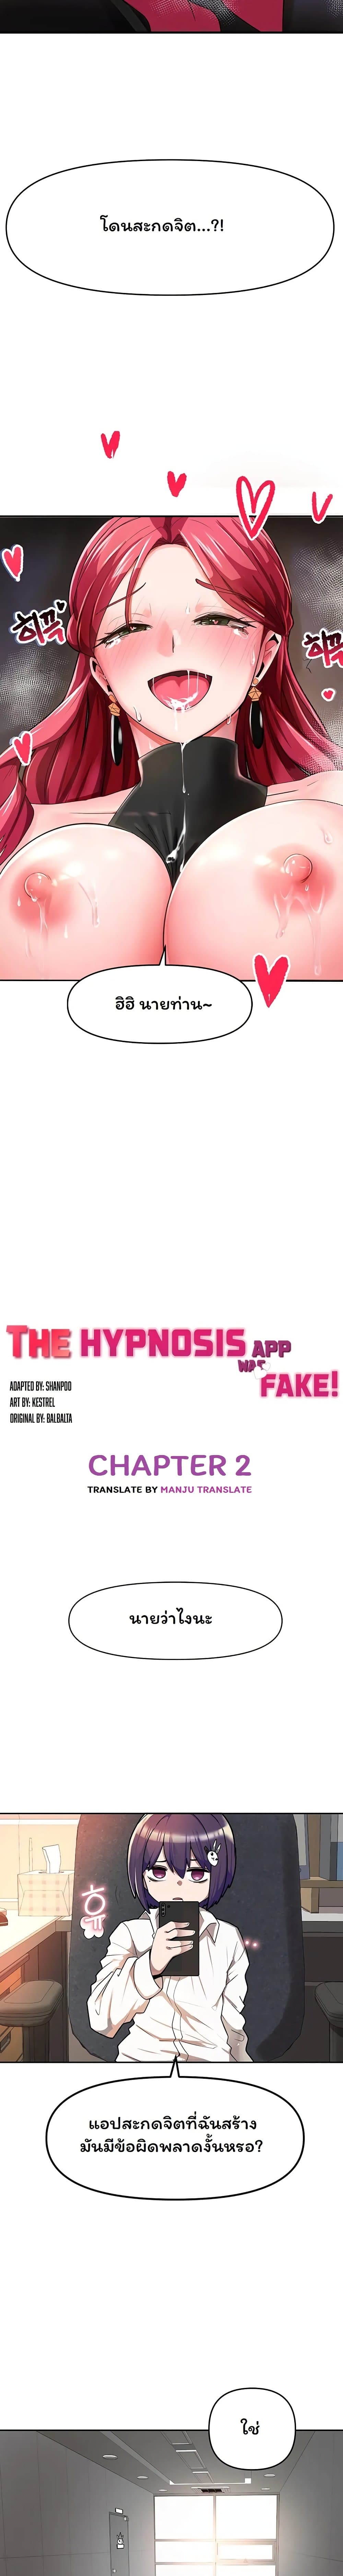 The Hypnosis App Was Fake 2 02